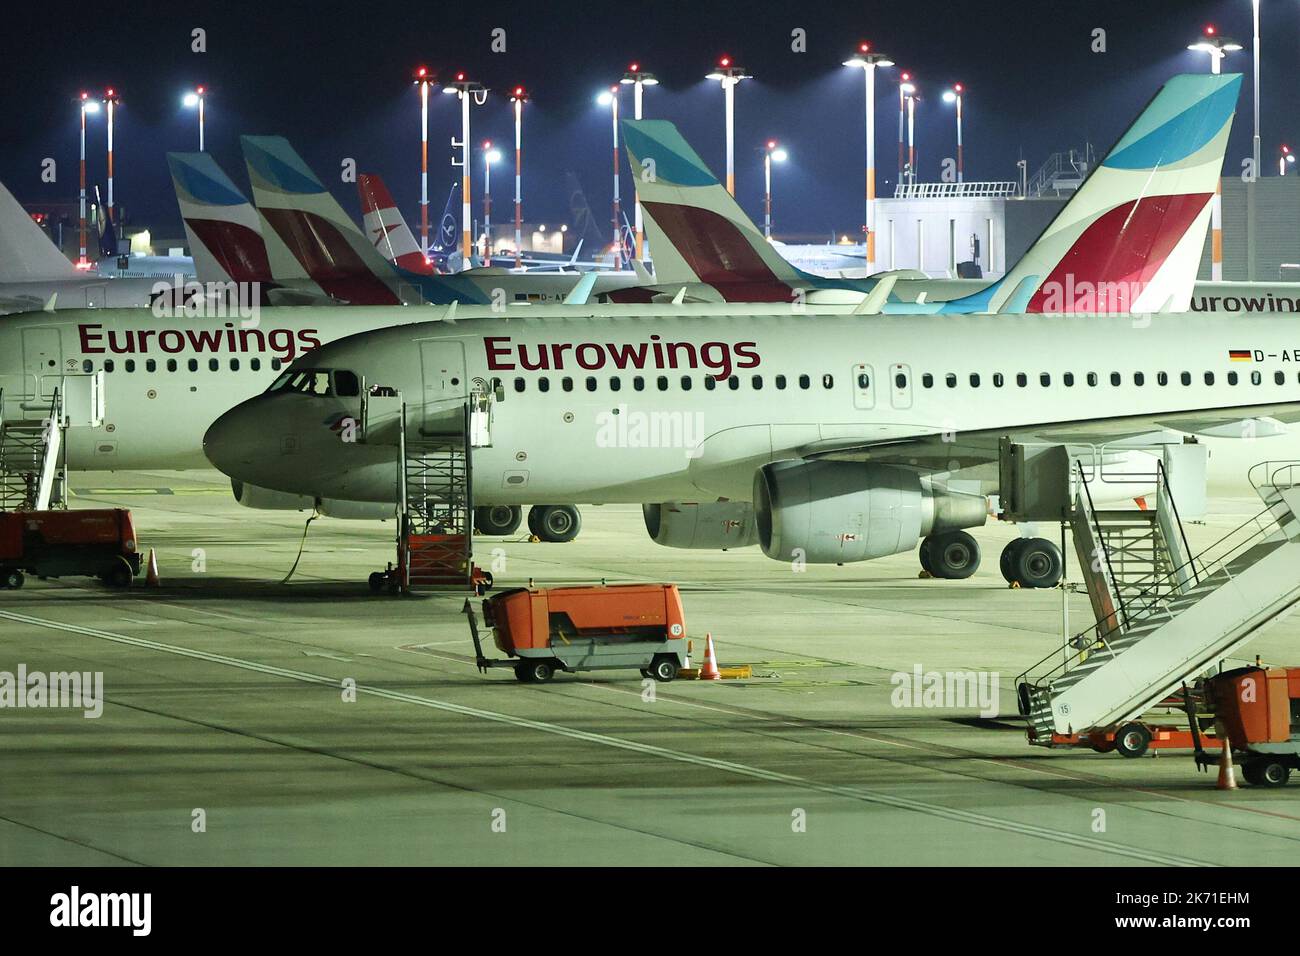 Hamburg, Germany. 17th Oct, 2022. Machines of the airline Eurowings stand dark and without crew or ground staff at night at Hamburg Airport. The Vereinigung Cockpit union has called on Eurowings pilots to walk off the job from 00:00 on Monday, (Oct. 17) to Wednesday (Oct. 19) inclusive. The industrial action has begun as planned, said a spokesman for the Vereinigung Cockpit (VC) pilots' union. No further offer had been submitted. Credit: Bodo Marks/Bodo Marks/dpa/Alamy Live News Stock Photo